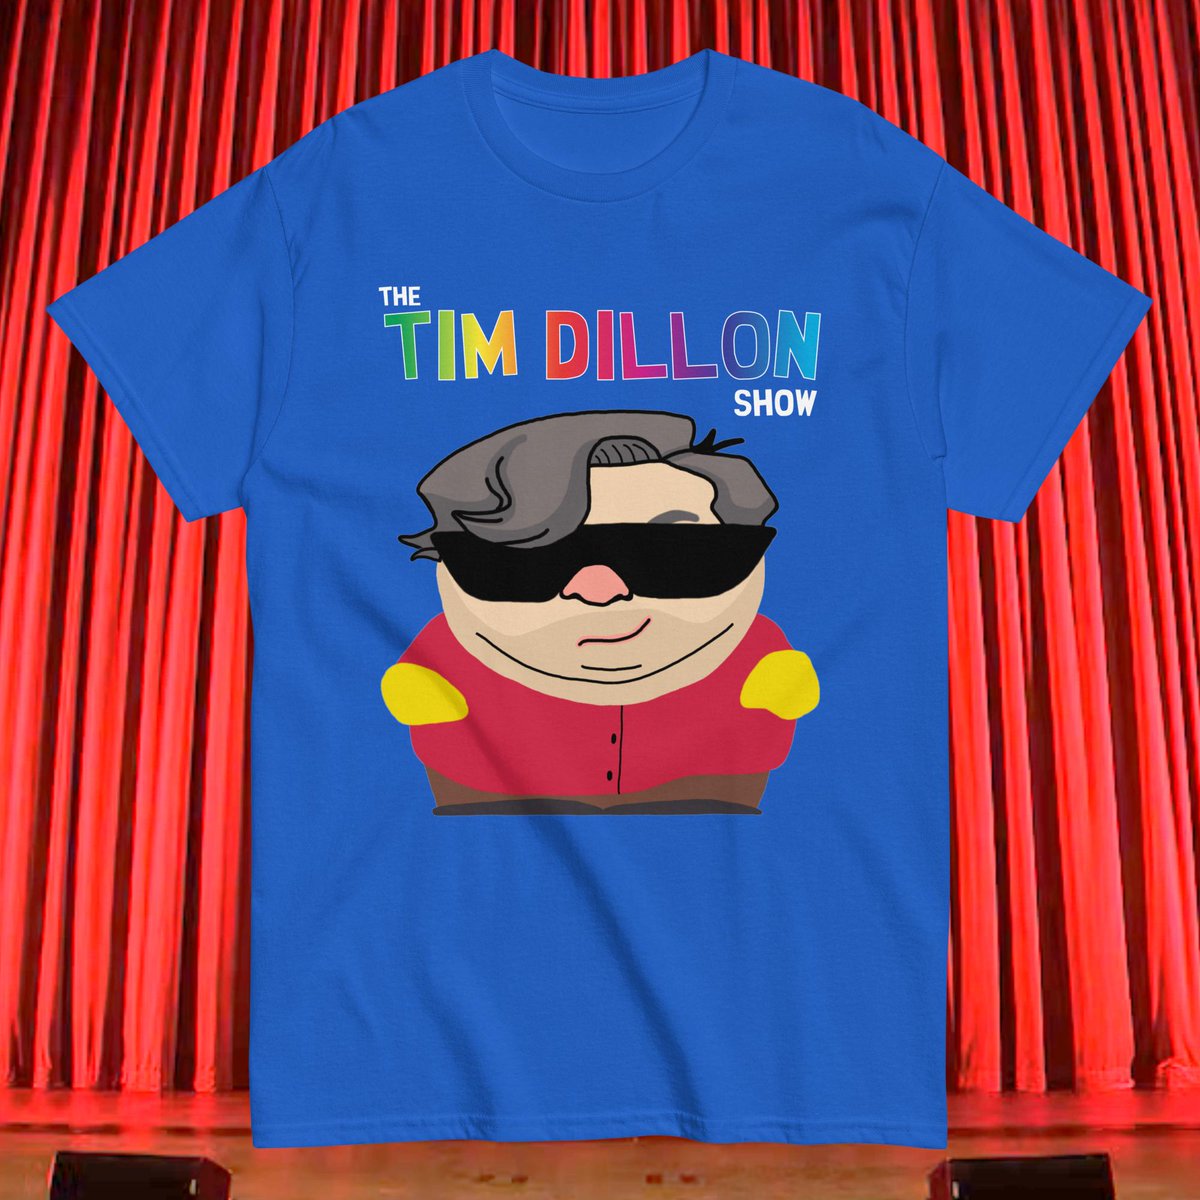 🐇Like for Tim Dillon 💚, Comment for Tom Segura✍️🐇
🫶Get Now!🫶
nextcultbrand.com/products/tim-d…

@TimJDillon #timdillon #thetimdillonshow #timdillonpodcast #comedy #standup #standupcomedy #podcast #comedypodcast